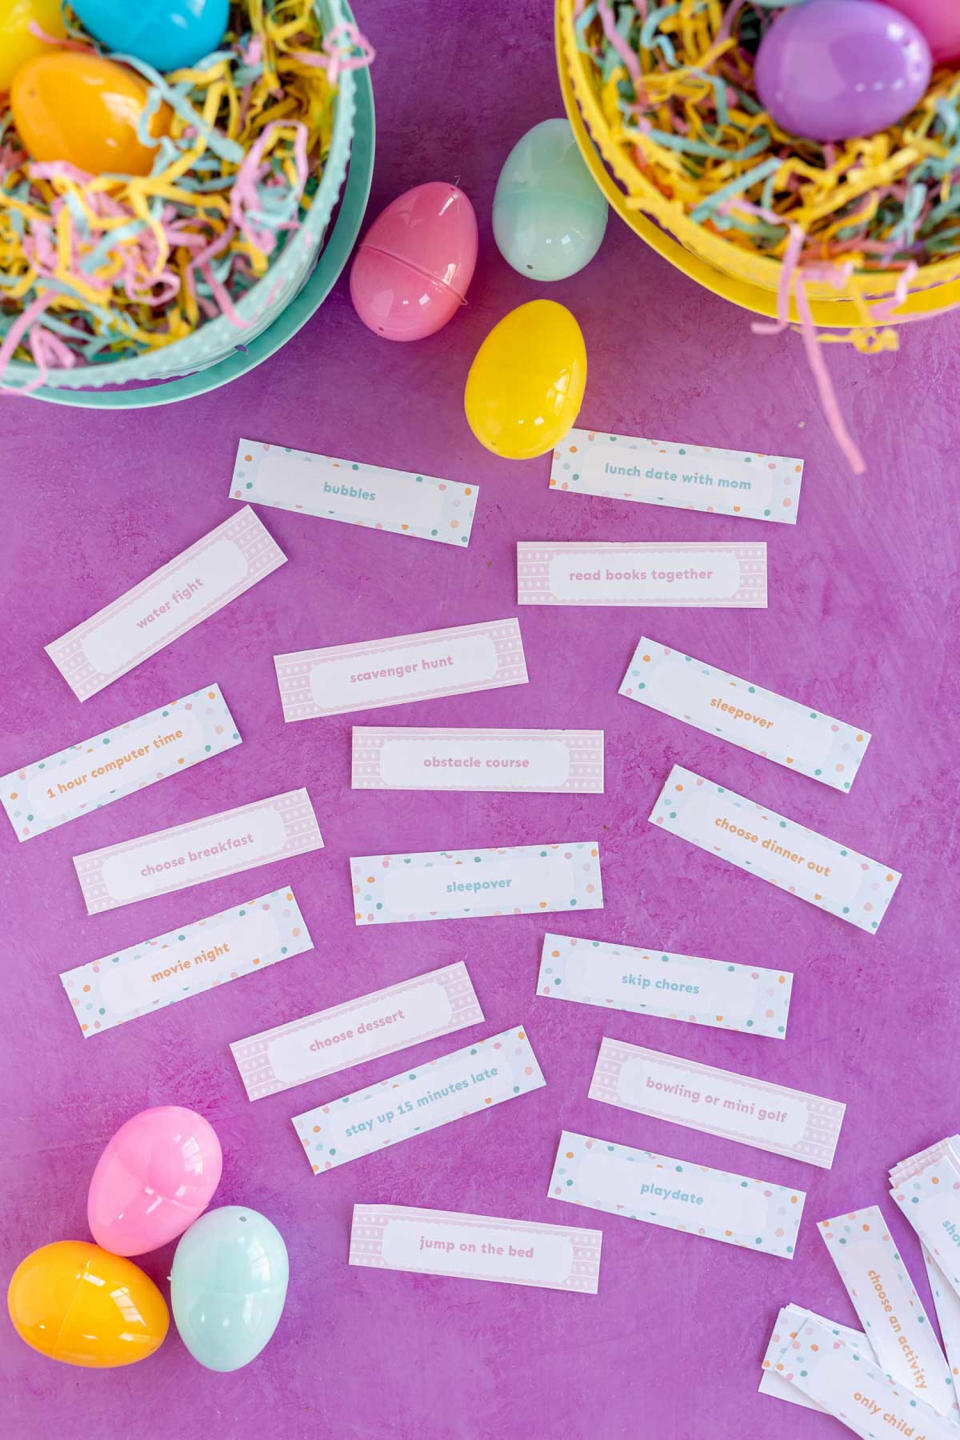 candy free easter egg hunt  (Play Party Plan)